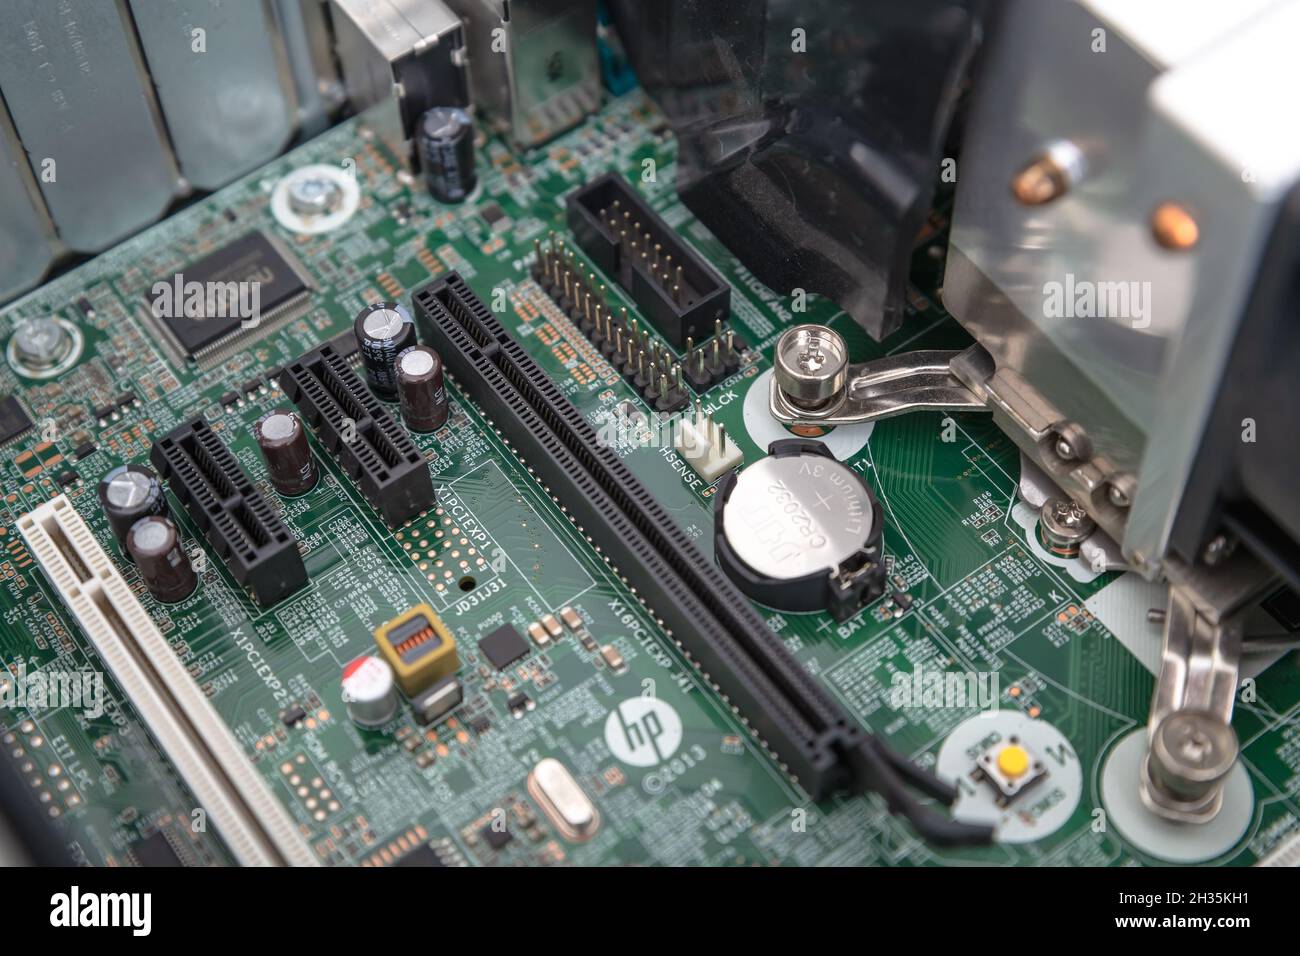 Woodville, Australia - October 15, 2021: Close-up top view of motherboard PCI and PCI Express slots installed in a small factor business desktop Stock Photo